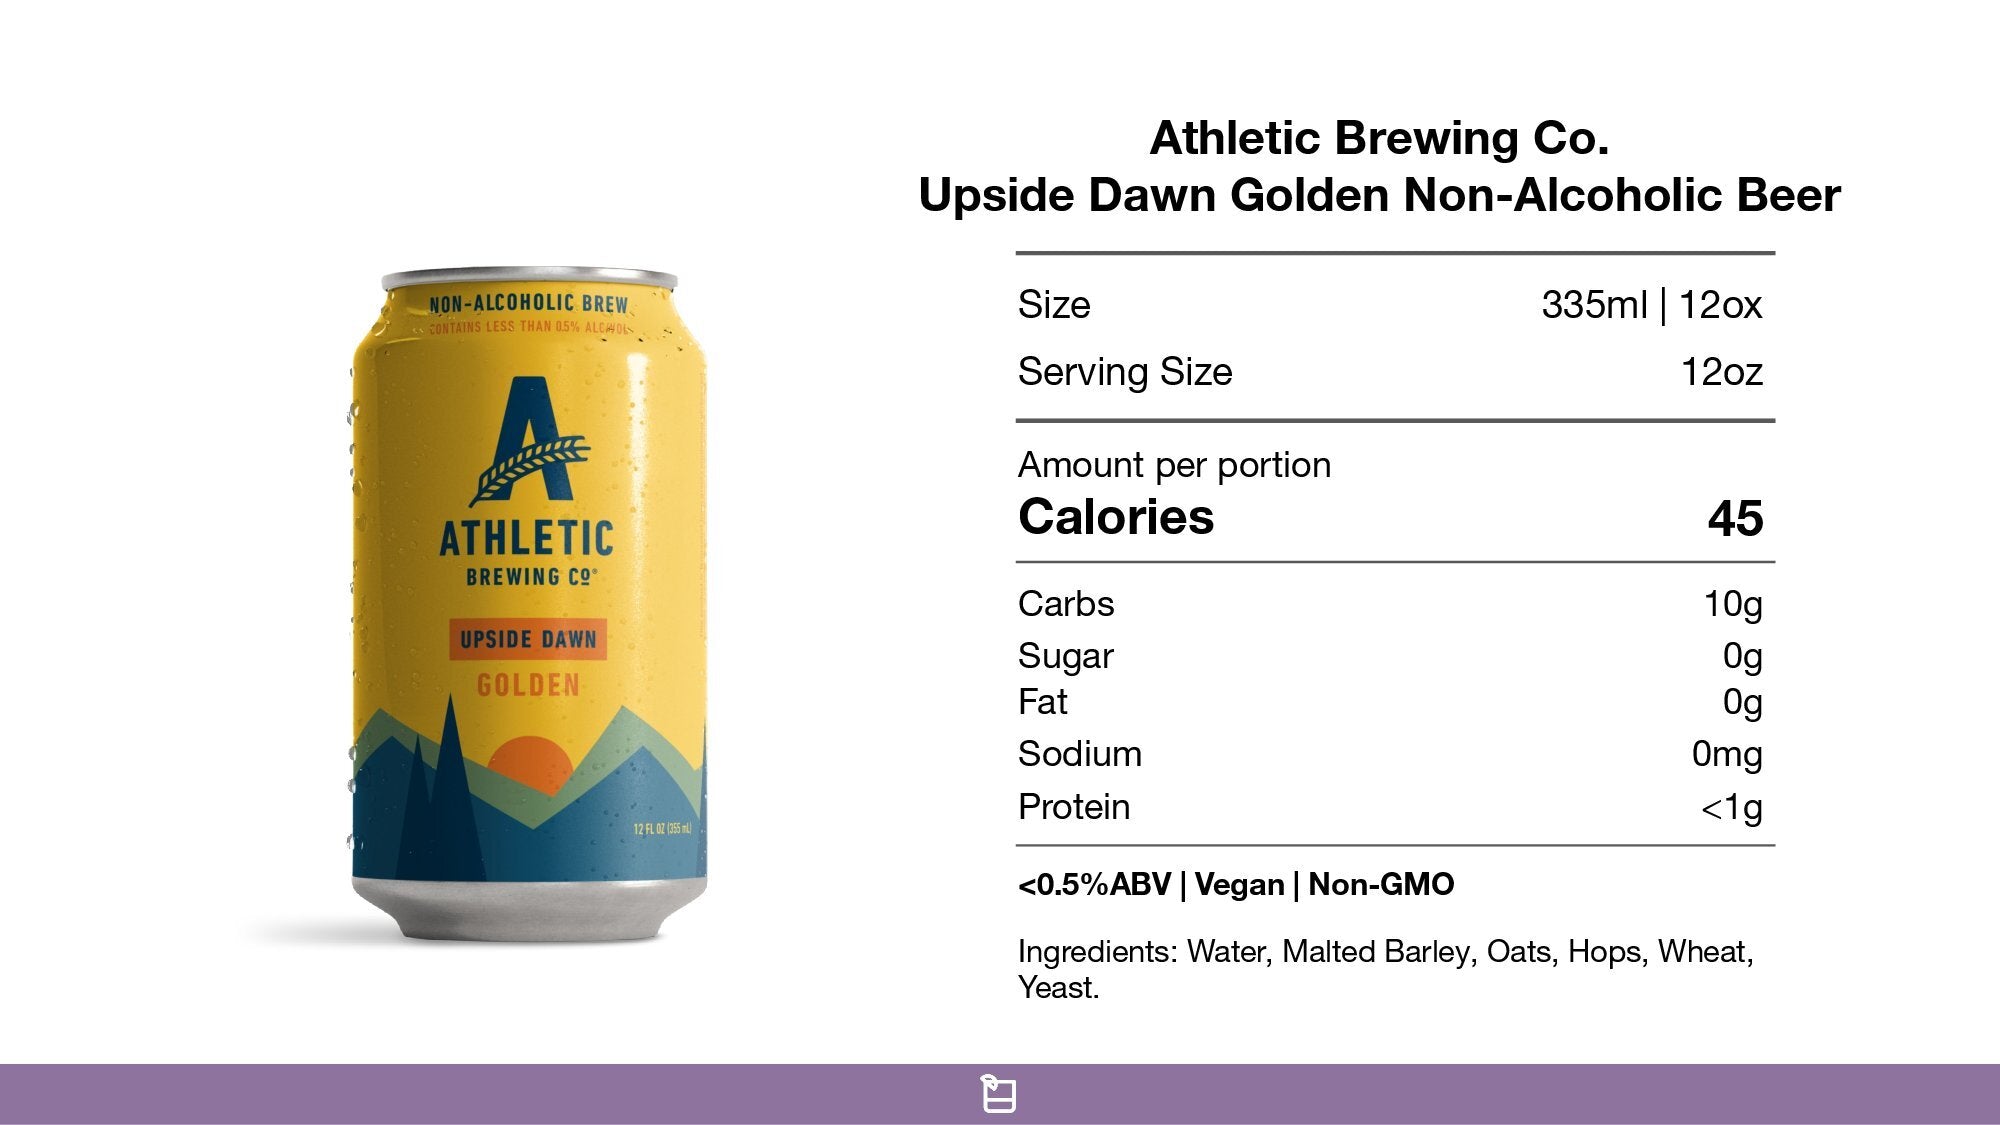 Athletic Brewing Upside Dawn Golden Ale Non-Alcoholic Beer Nutrition